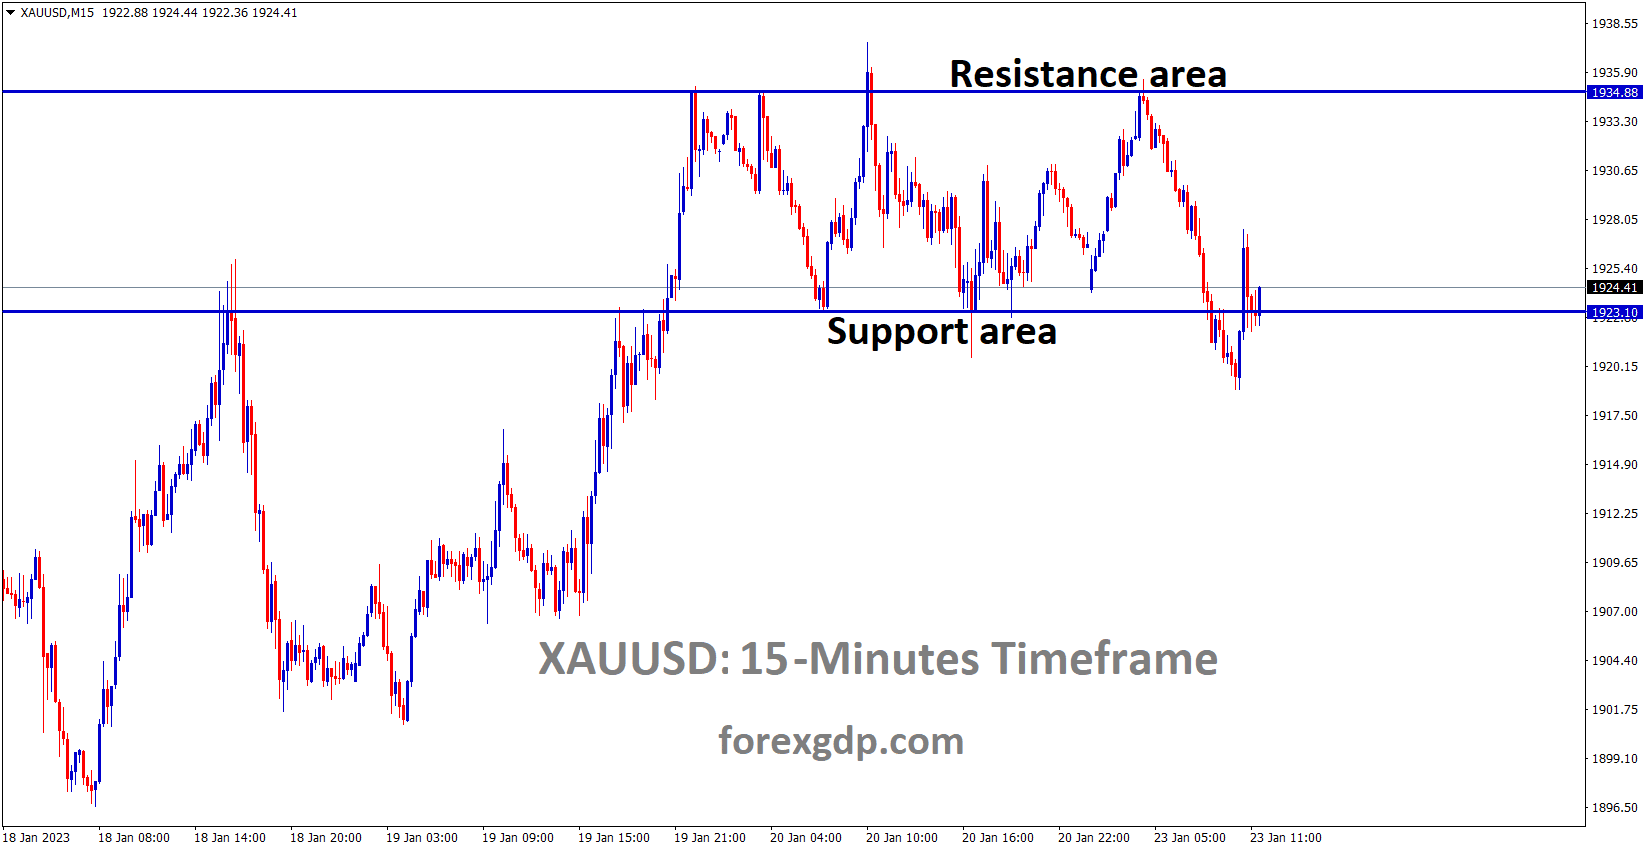 XAUUSD Gold price is moving in the Box pattern and the market has rebounded from the horizontal support area of the pattern